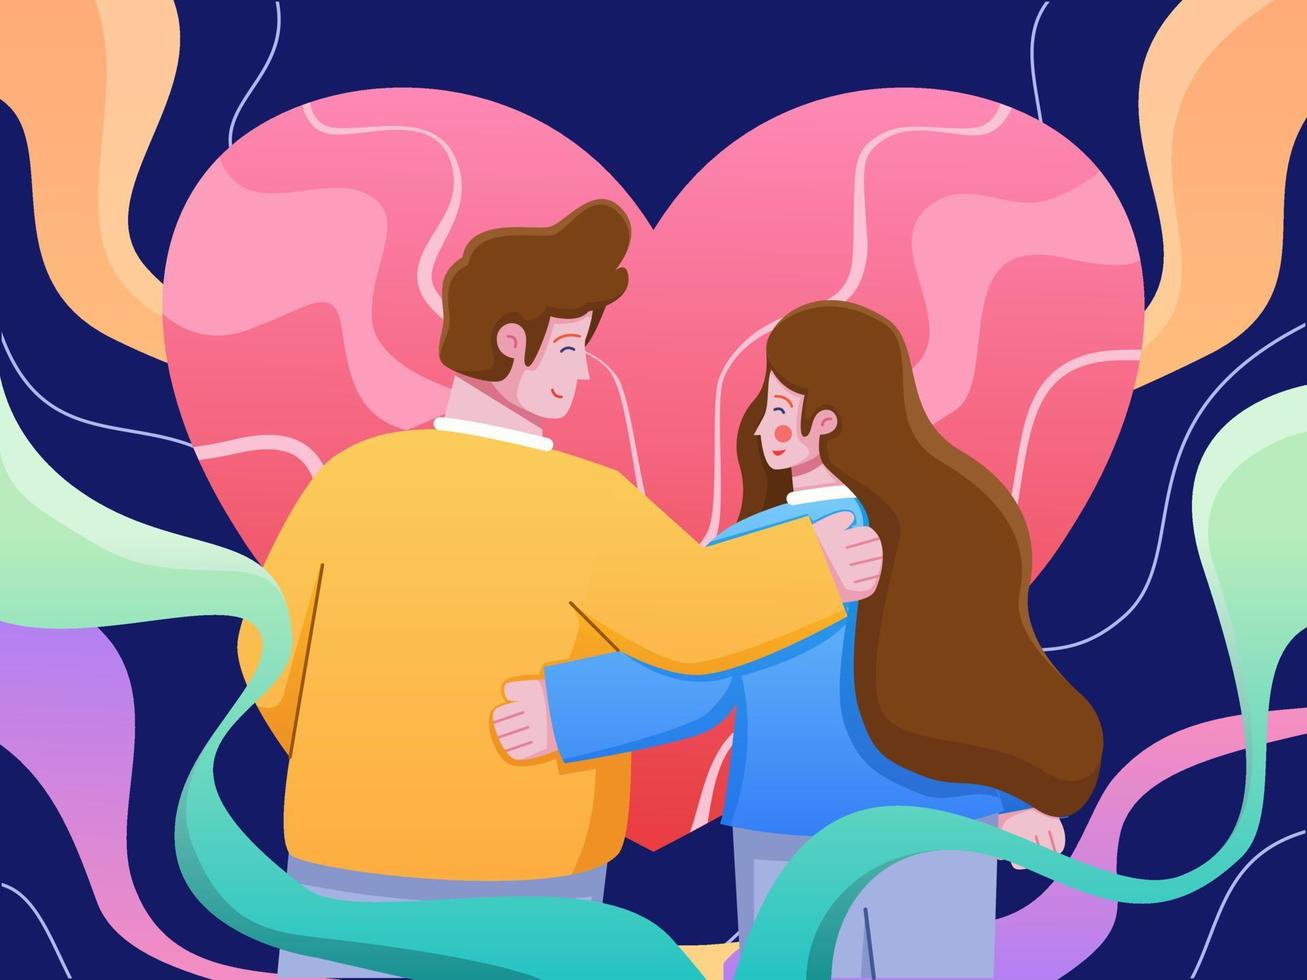 Cute Cartoon Flat Illustration of young woman and man in love and hugging. Romantic Couple at Valentine's Day. Can be used for animation, greeting card, postcard, invitation, web, social media, etc vector